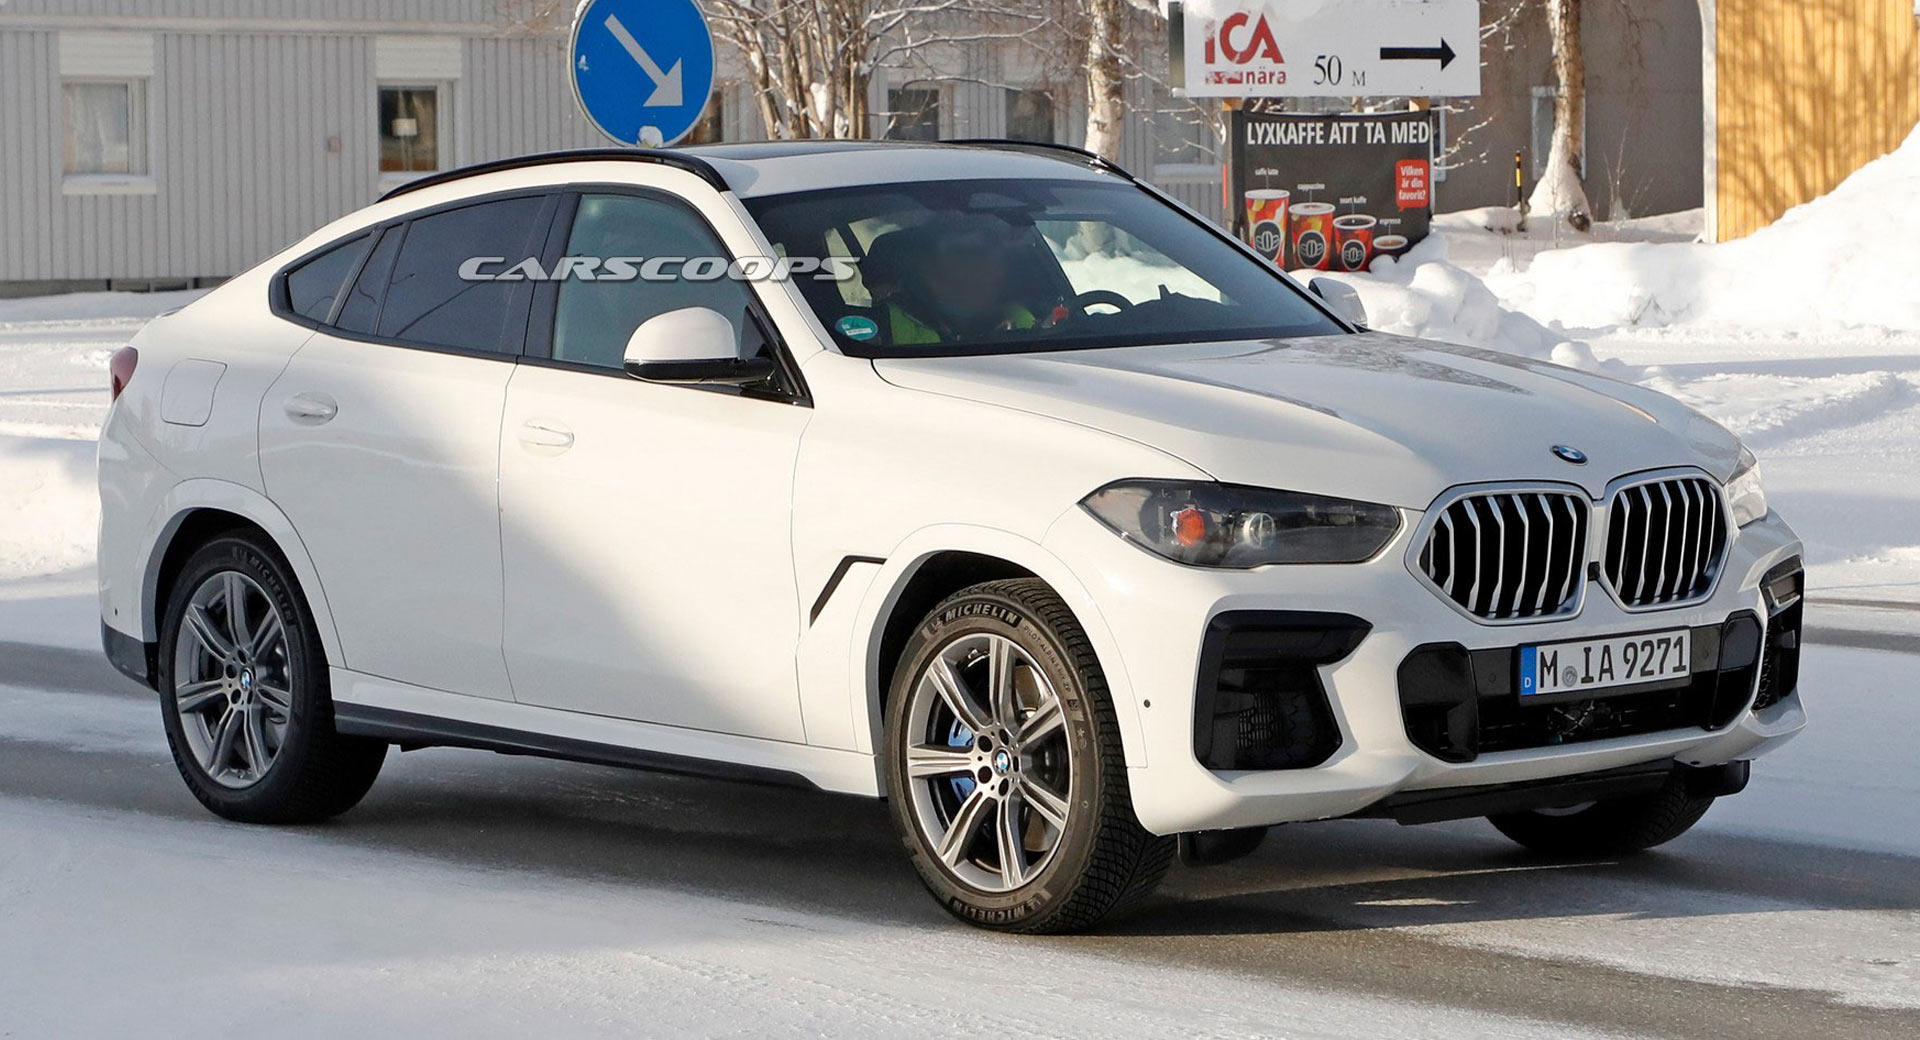 BMW X6 Facelift Spied With An iX-Like Curved Display